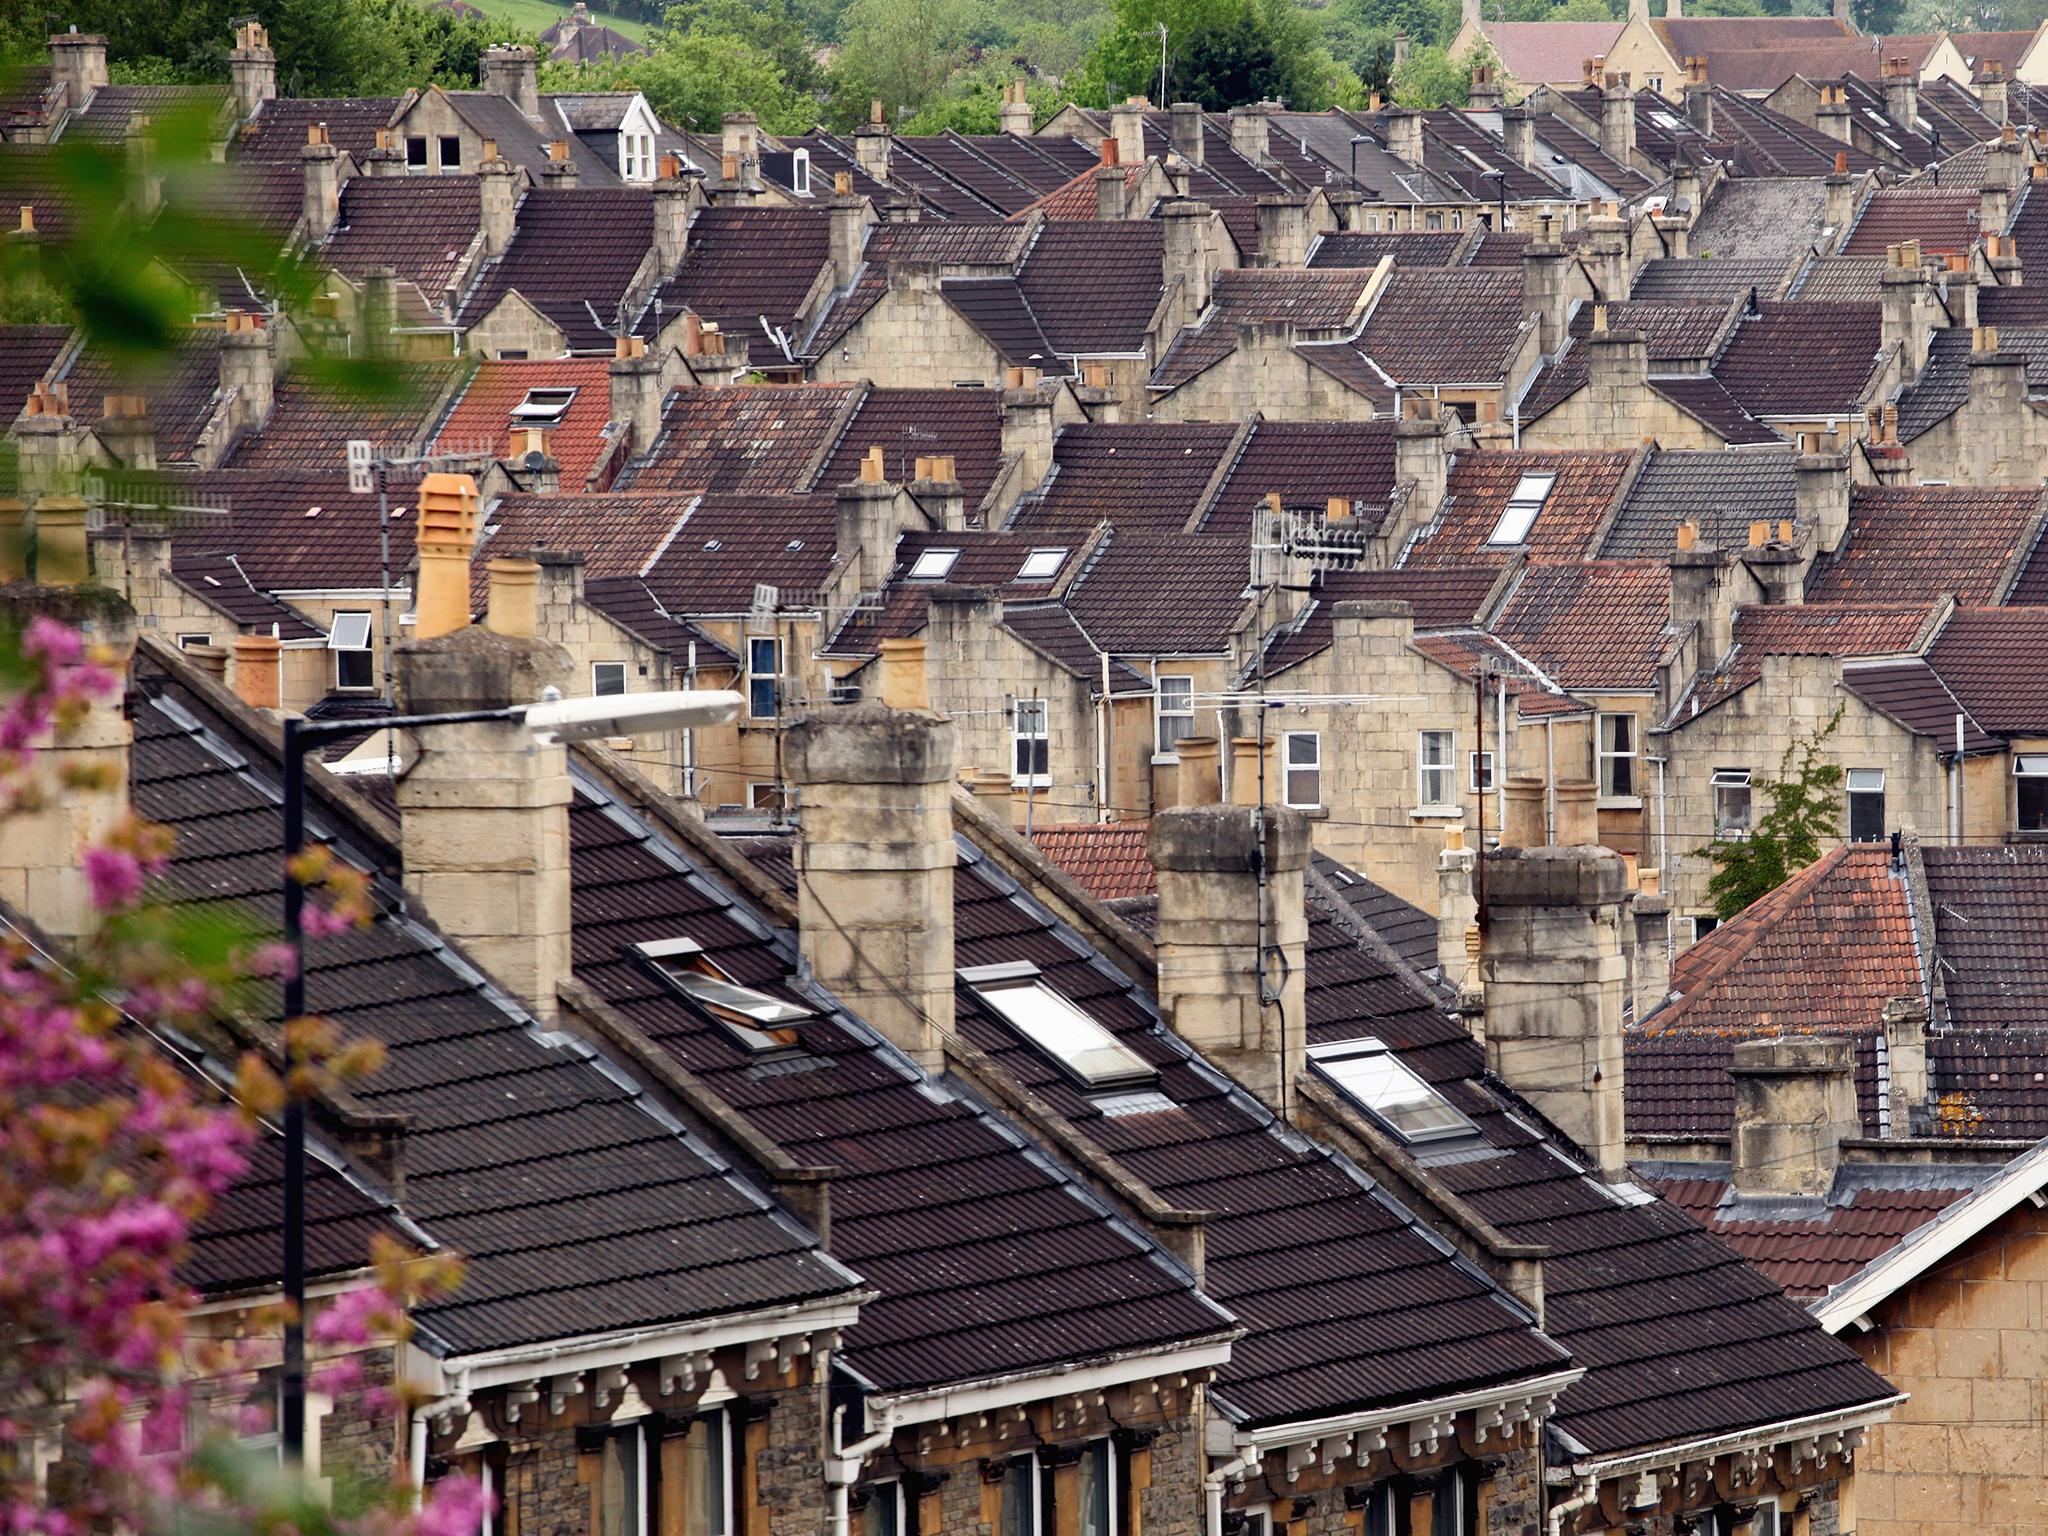 Figures from Nationwide show that house price growth went up 0.1 per cent in November